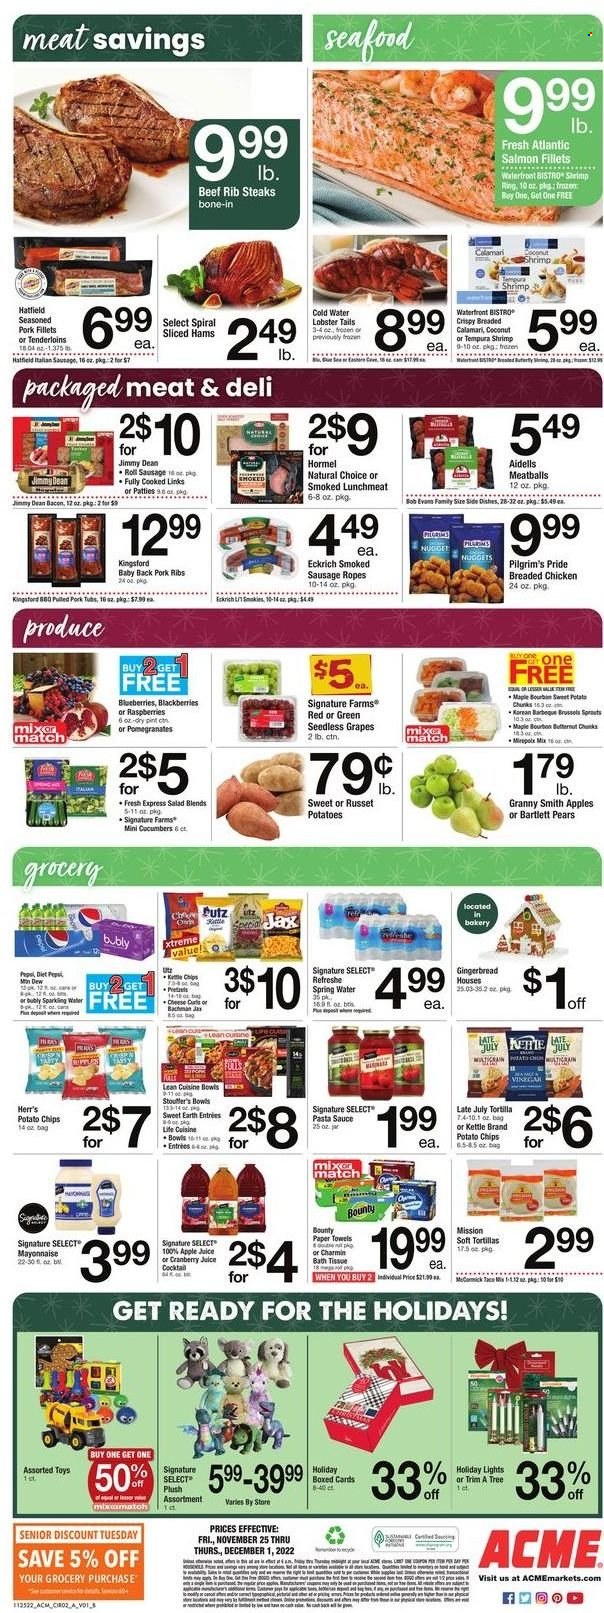 thumbnail - ACME Flyer - 11/25/2022 - 12/01/2022 - Sales products - tortillas, pretzels, gingerbread, russet potatoes, sweet potato, salad, brussel sprouts, Bartlett pears, blackberries, blueberries, grapes, seedless grapes, pears, Granny Smith, calamari, lobster, salmon, salmon fillet, seafood, lobster tail, shrimps, pasta sauce, meatballs, nuggets, sauce, fried chicken, Lean Cuisine, Bob Evans, pulled pork, Jimmy Dean, Hormel, Kingsford, bacon, sausage, smoked sausage, italian sausage, lunch meat, cheese, mayonnaise, Bounty, potato chips, apple juice, cranberry juice, Pepsi, juice, spring water, sparkling water, steak, pork meat, pork ribs, pork back ribs, bath tissue, kitchen towels, paper towels, Charmin, boxed card, owl, toys, butternut squash, pomegranate. Page 2.